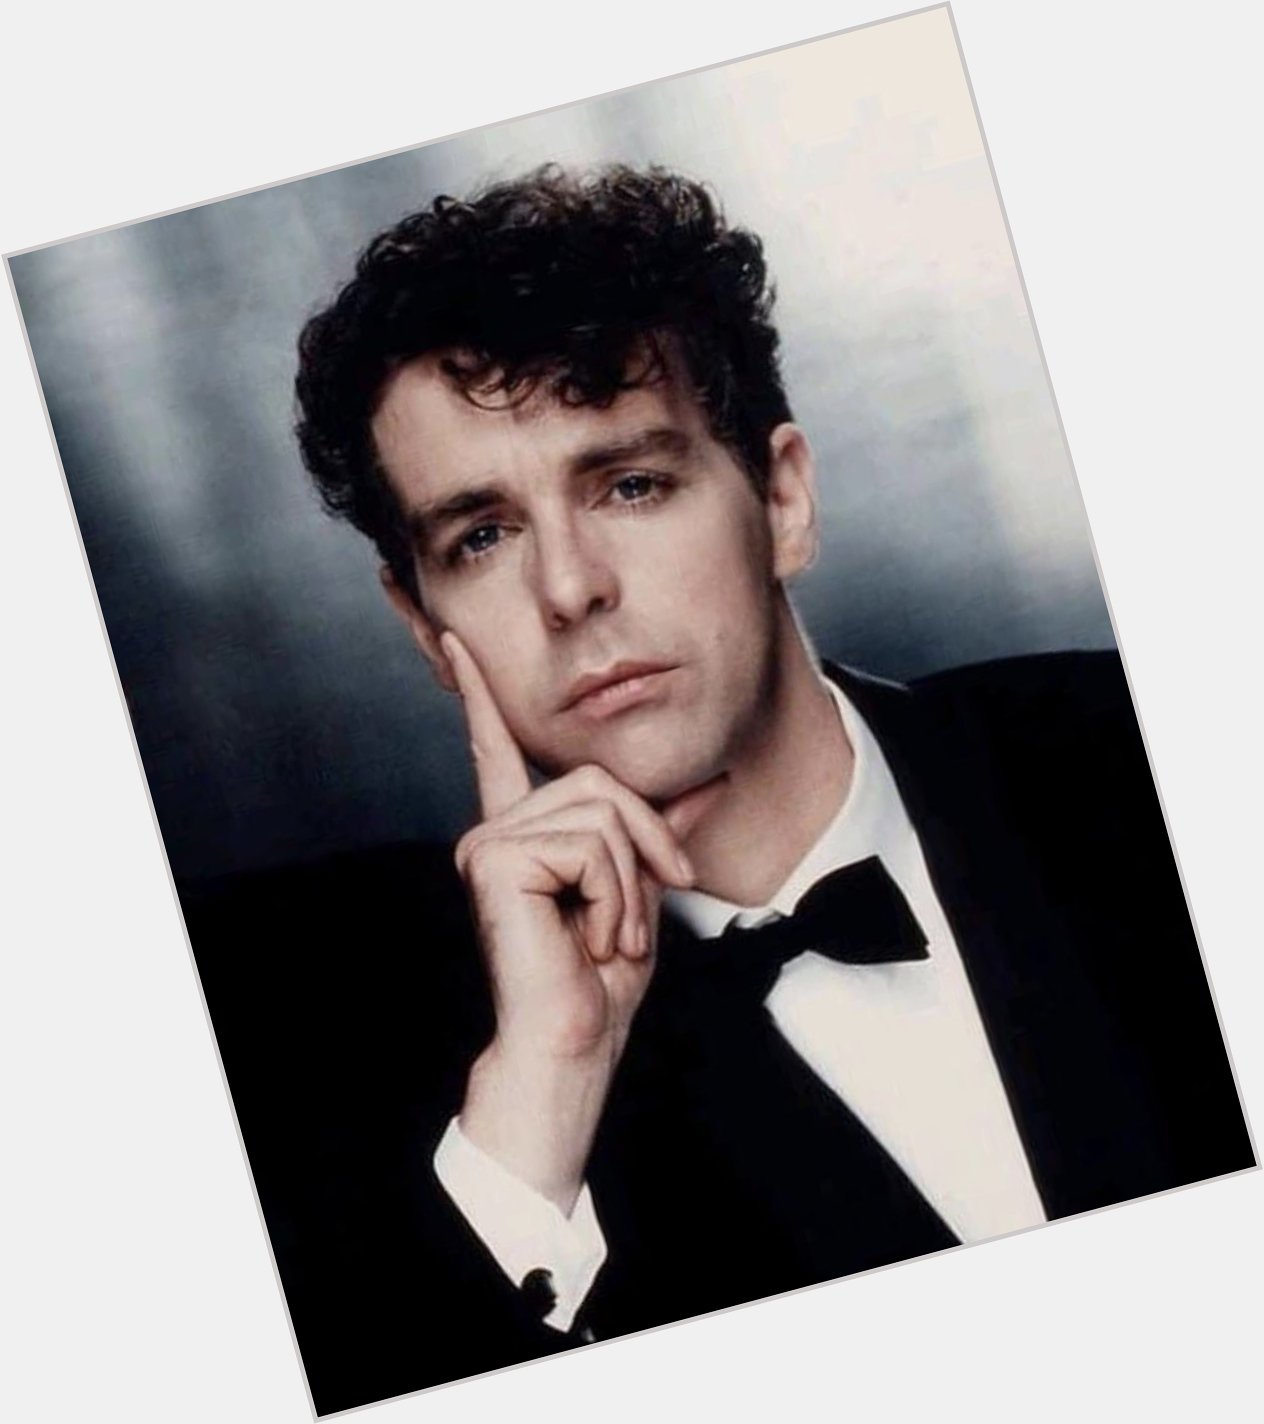 Happy 68th Birthday to Neil Tennant! Congrats from Barcelona!
. Thank you for your músic! 